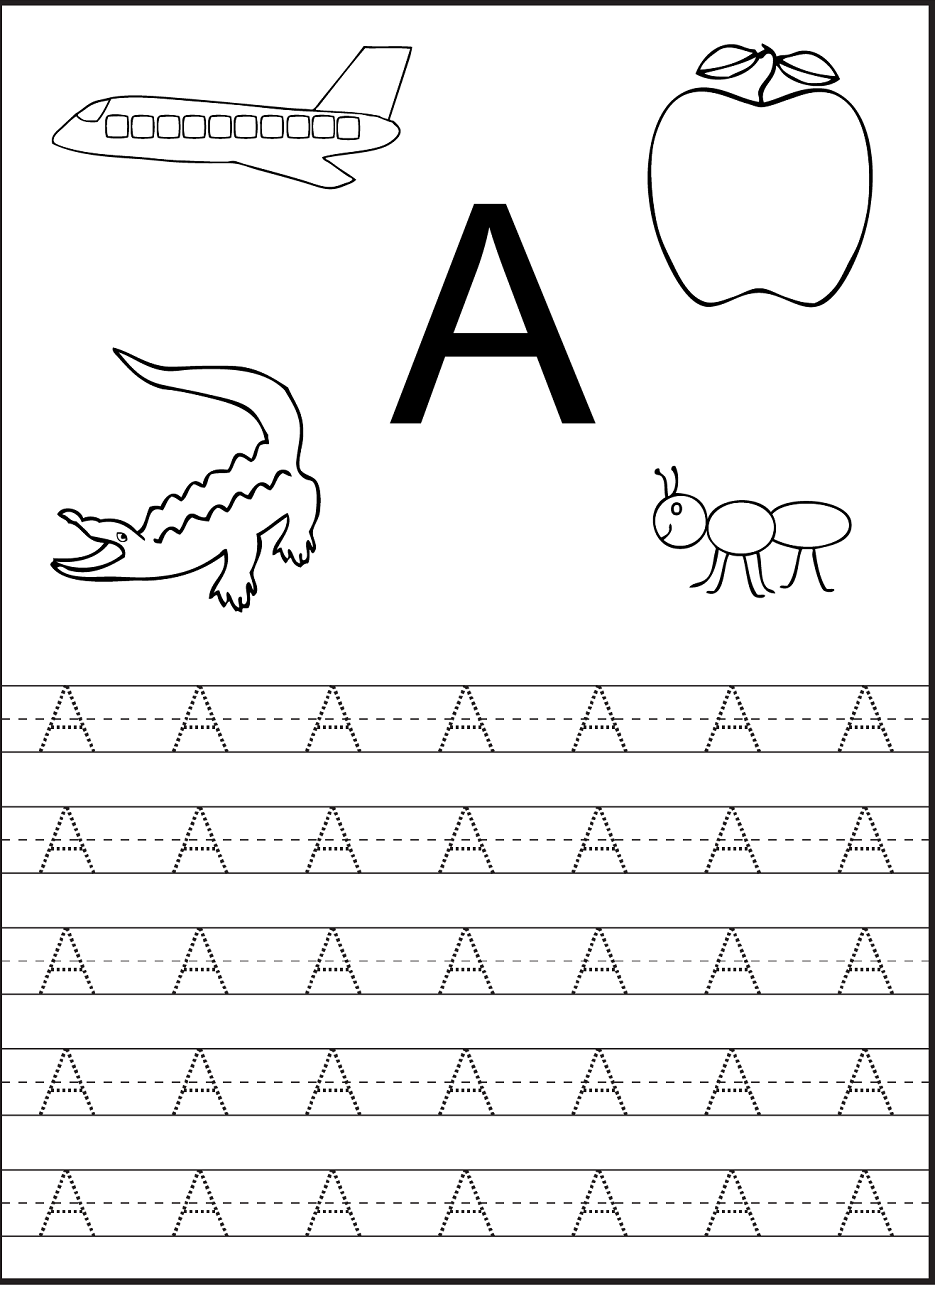 Tracing The Letter A Free Printable | Tracing Worksheets